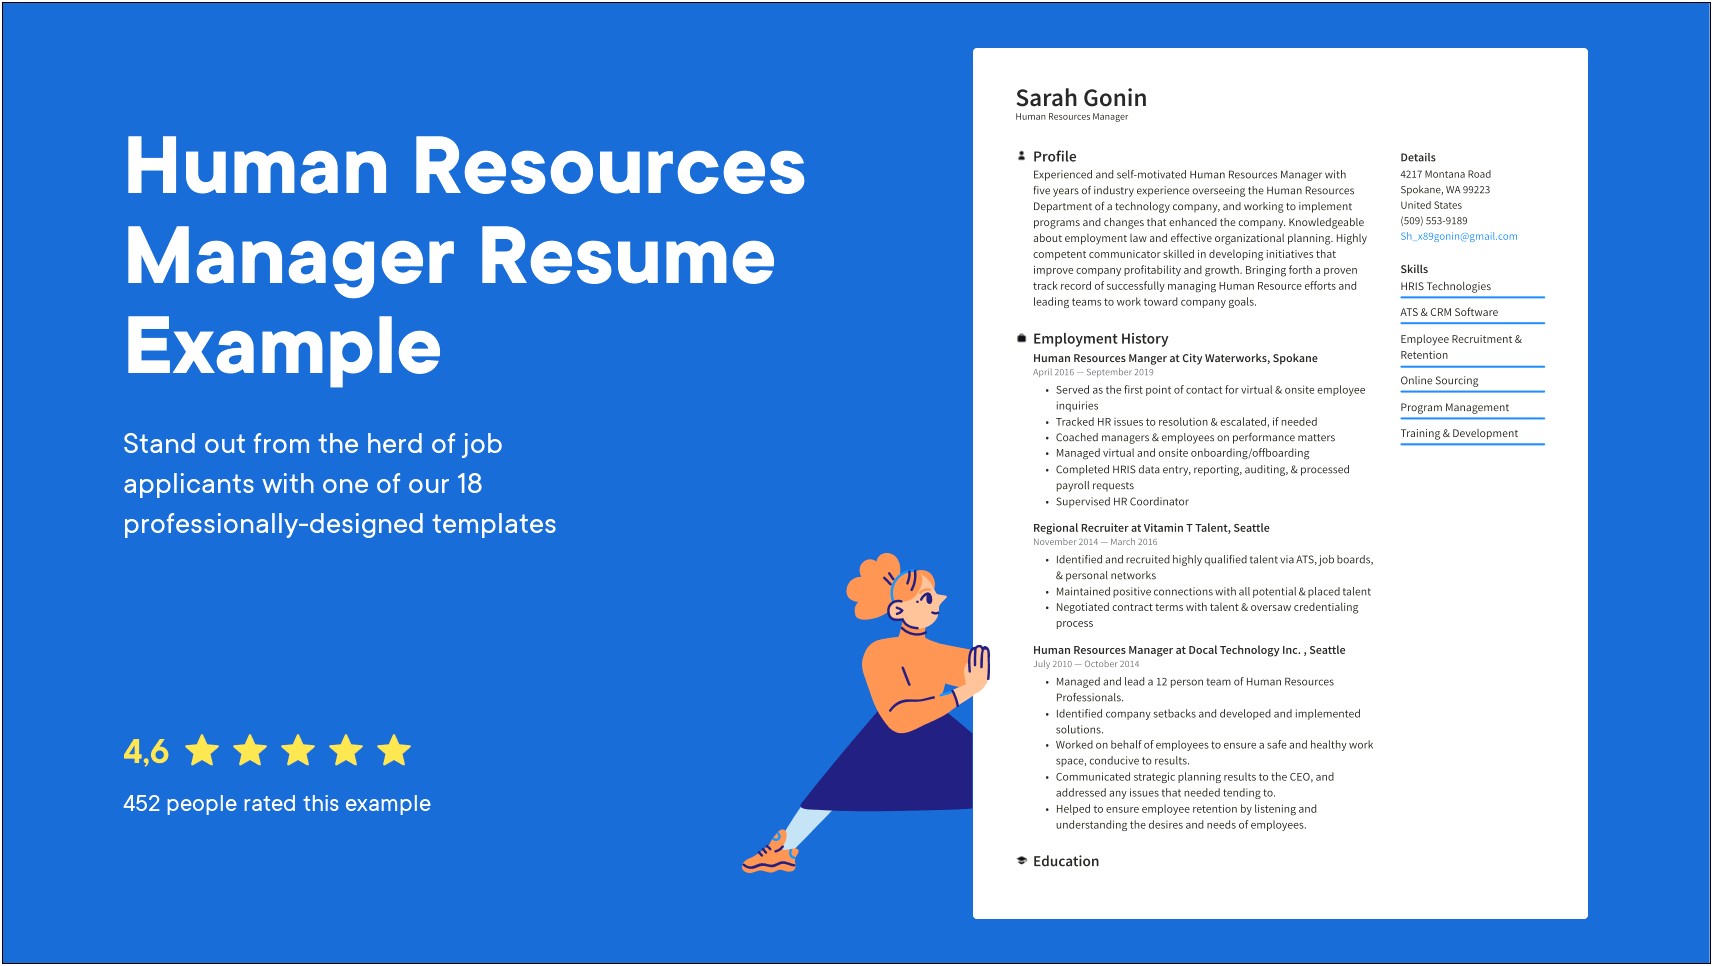 Human Resources Director Accomplishments Summary Resume Examples